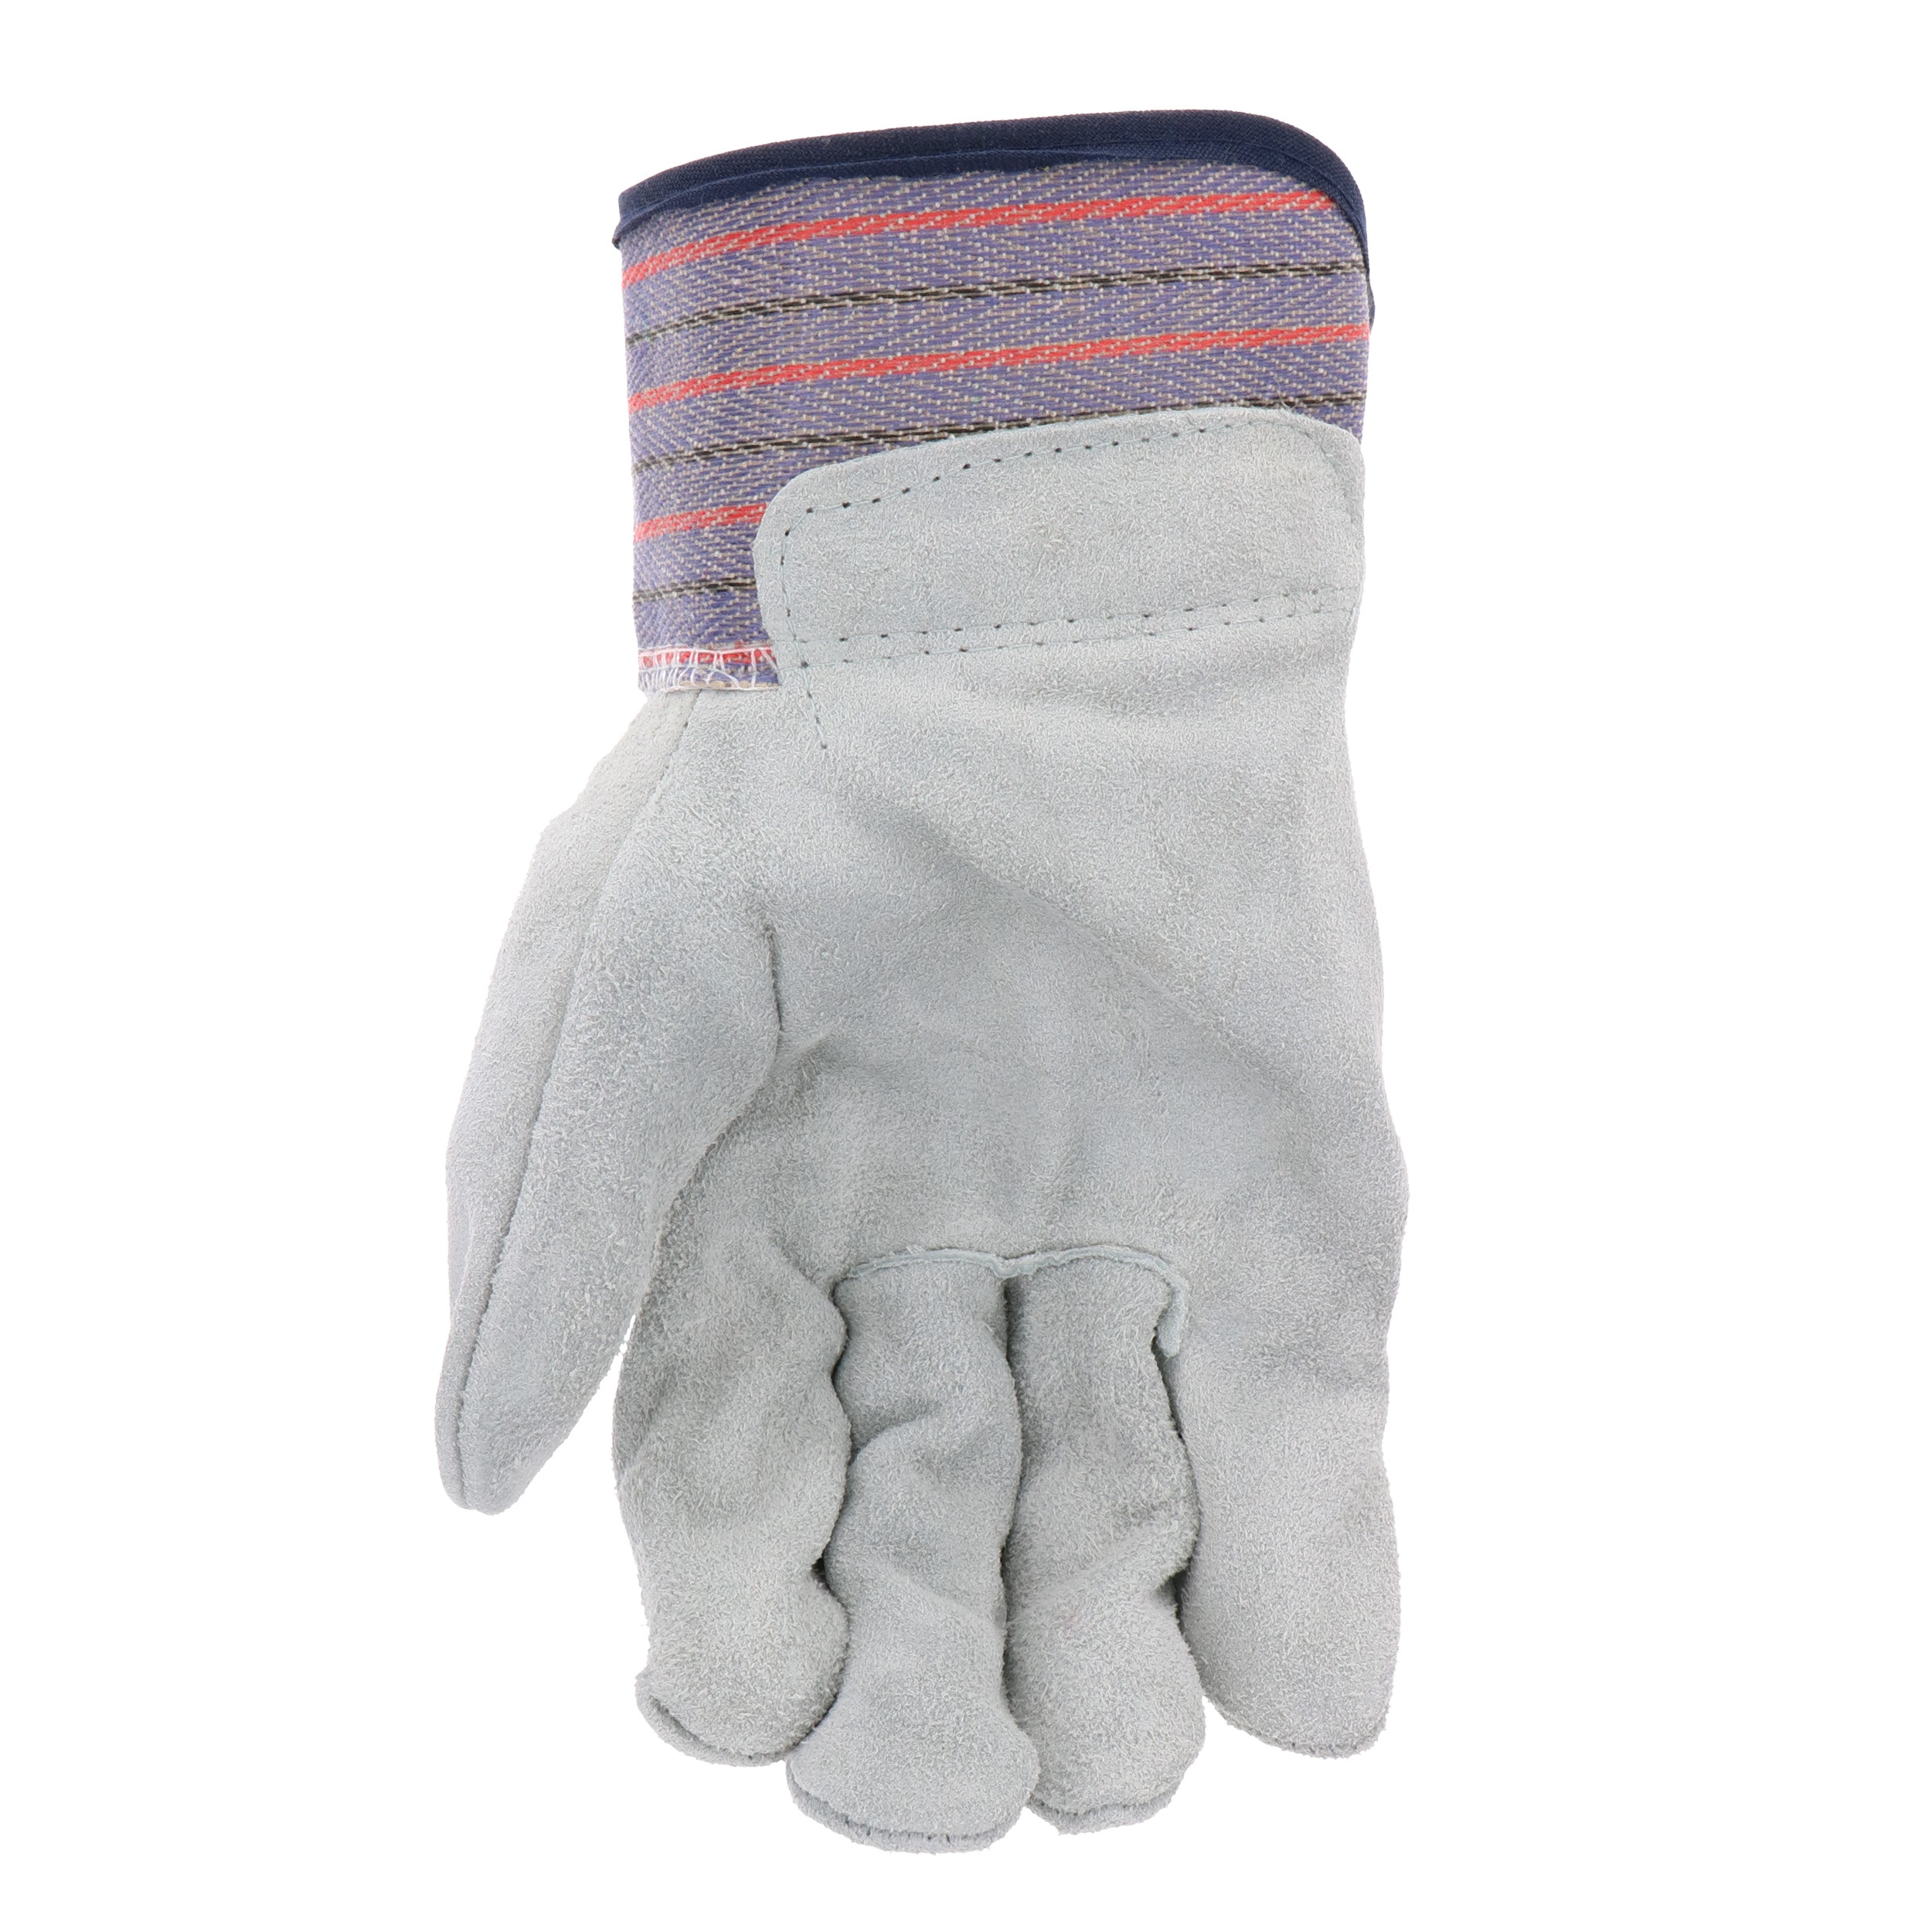 Project Source Large Leather Construction Gloves, (1-Pair) in the